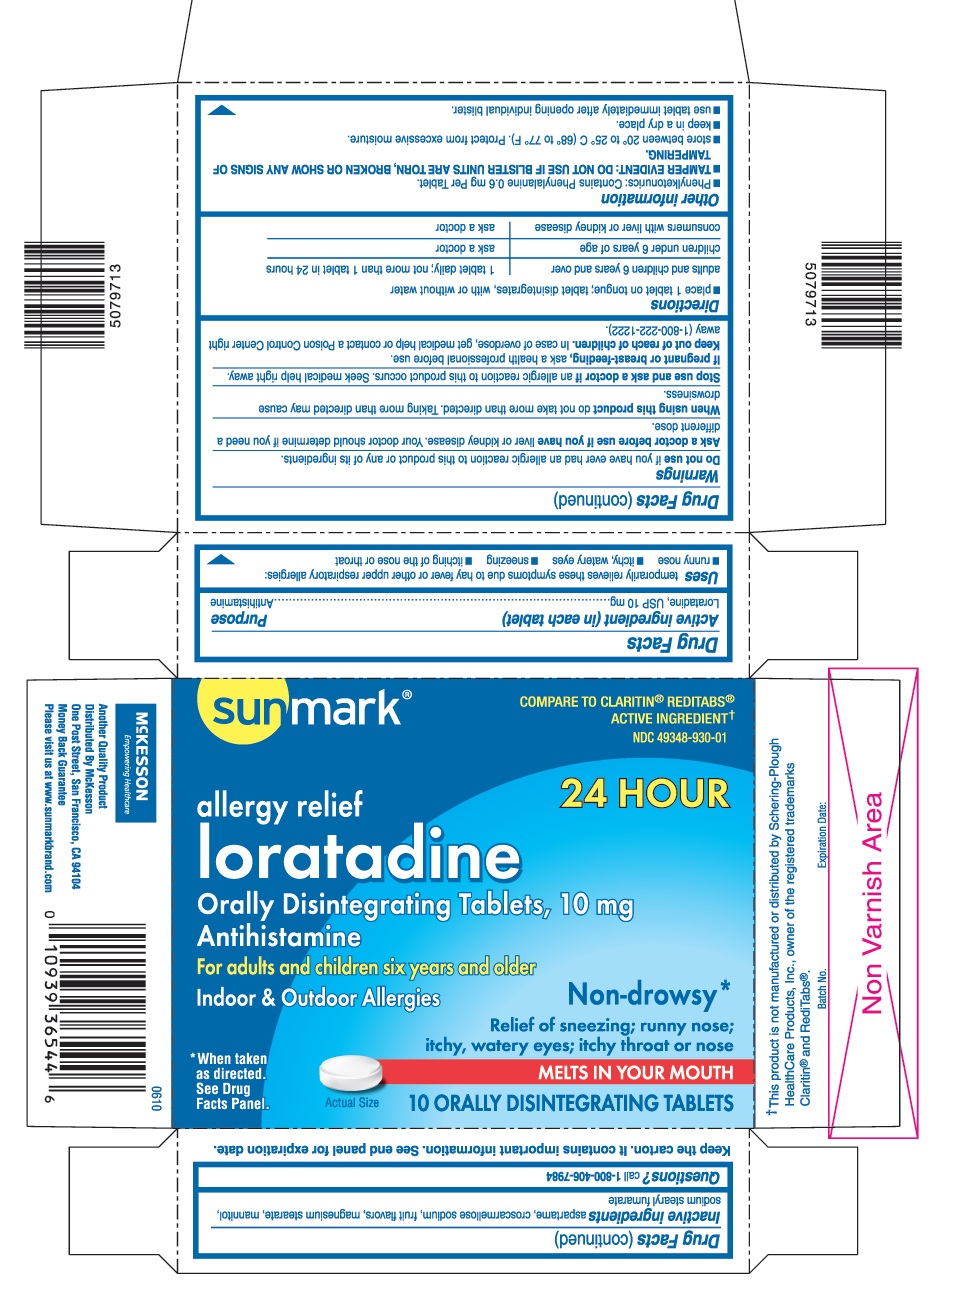 This is the 10 count blister carton label for Sunmark Loratadine ODT, 10 mg.